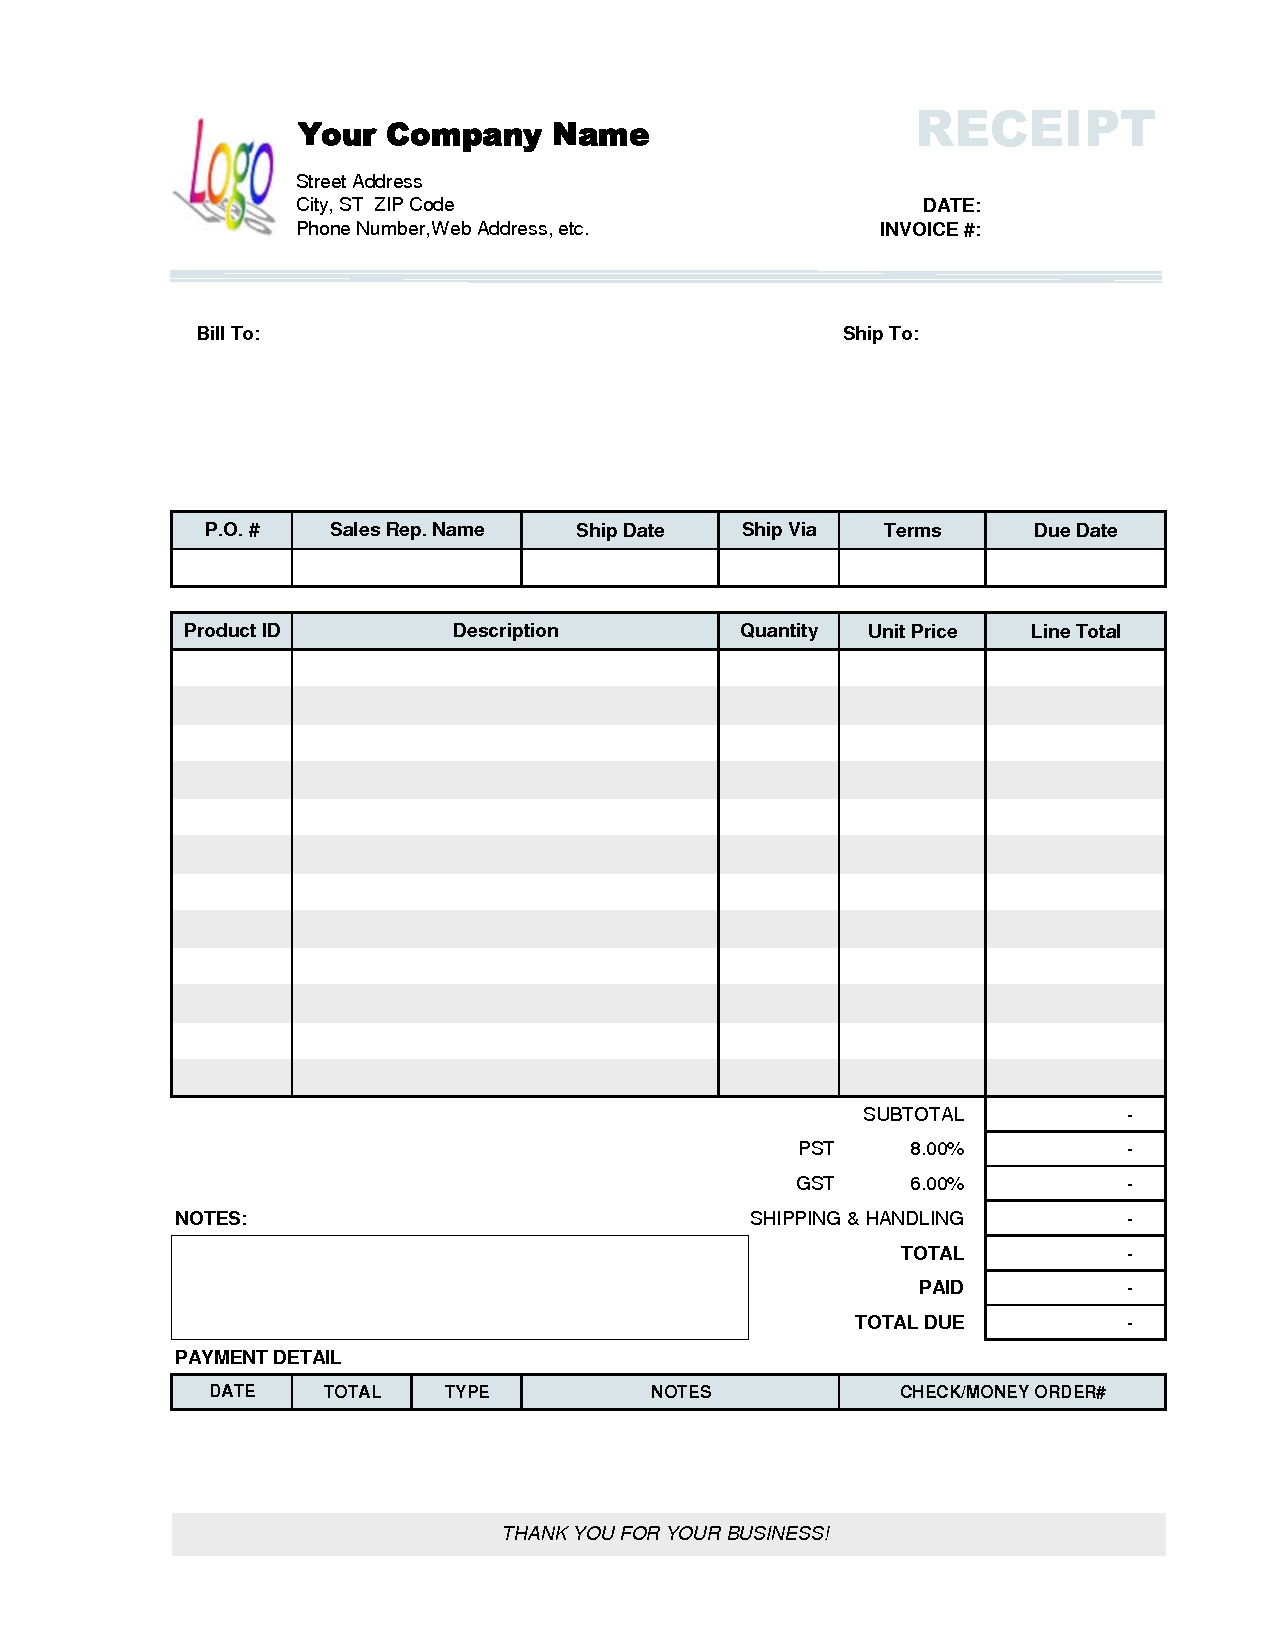 blank-billing-invoice-scope-of-work-template-organization-free-printable-work-invoices